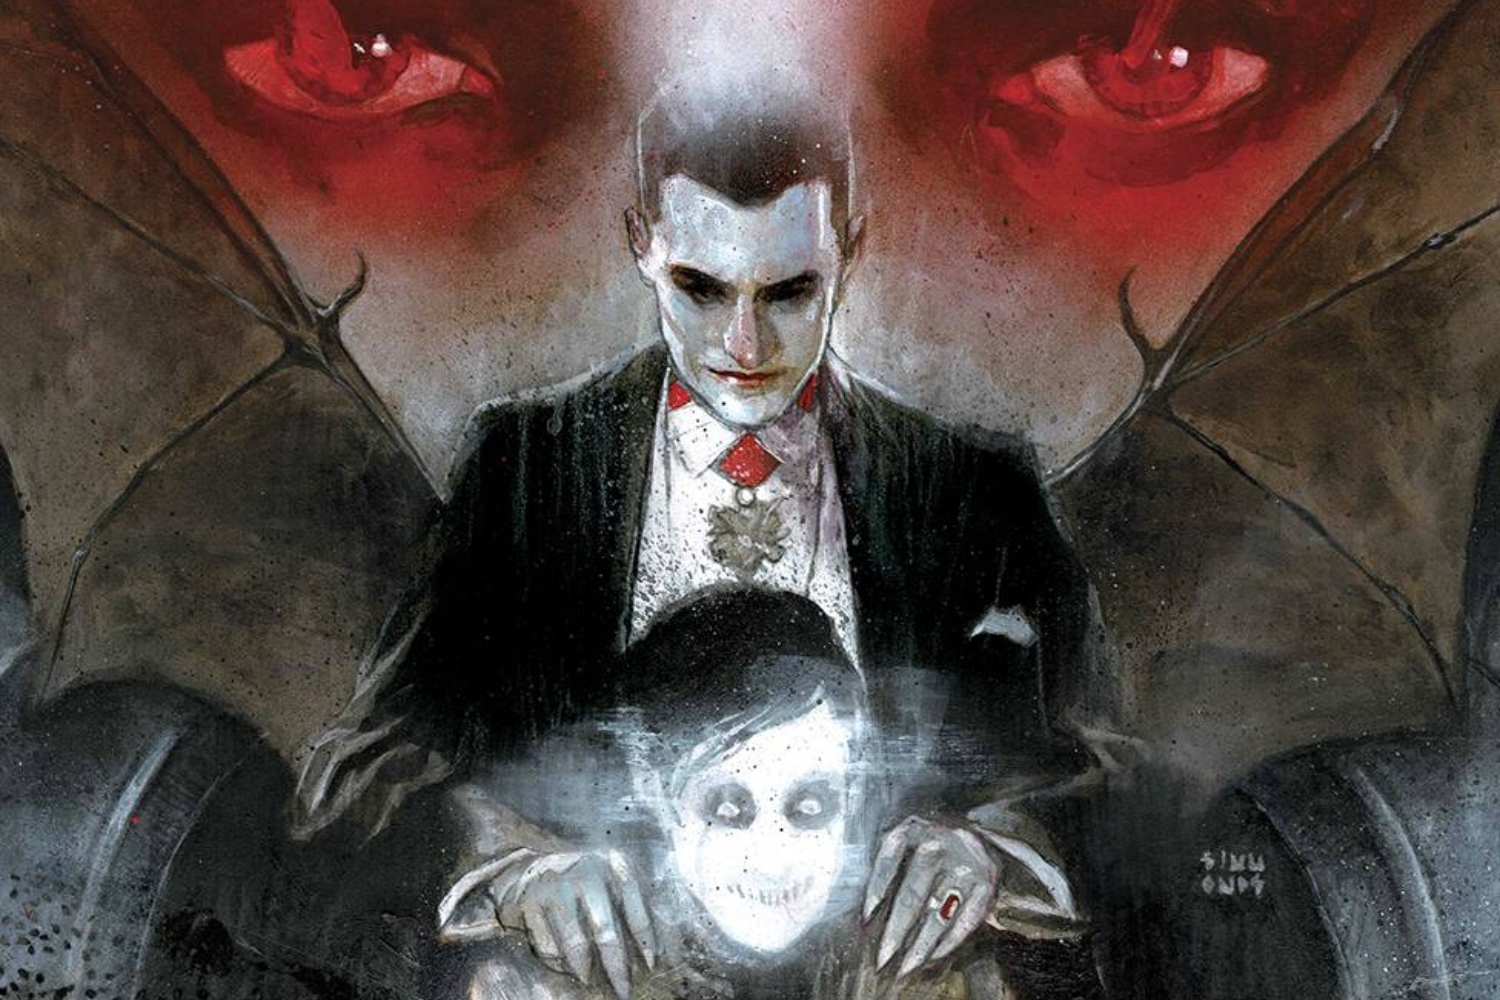 'Universal Monsters: Dracula' #2 turns the heat up on our vampirian mystery